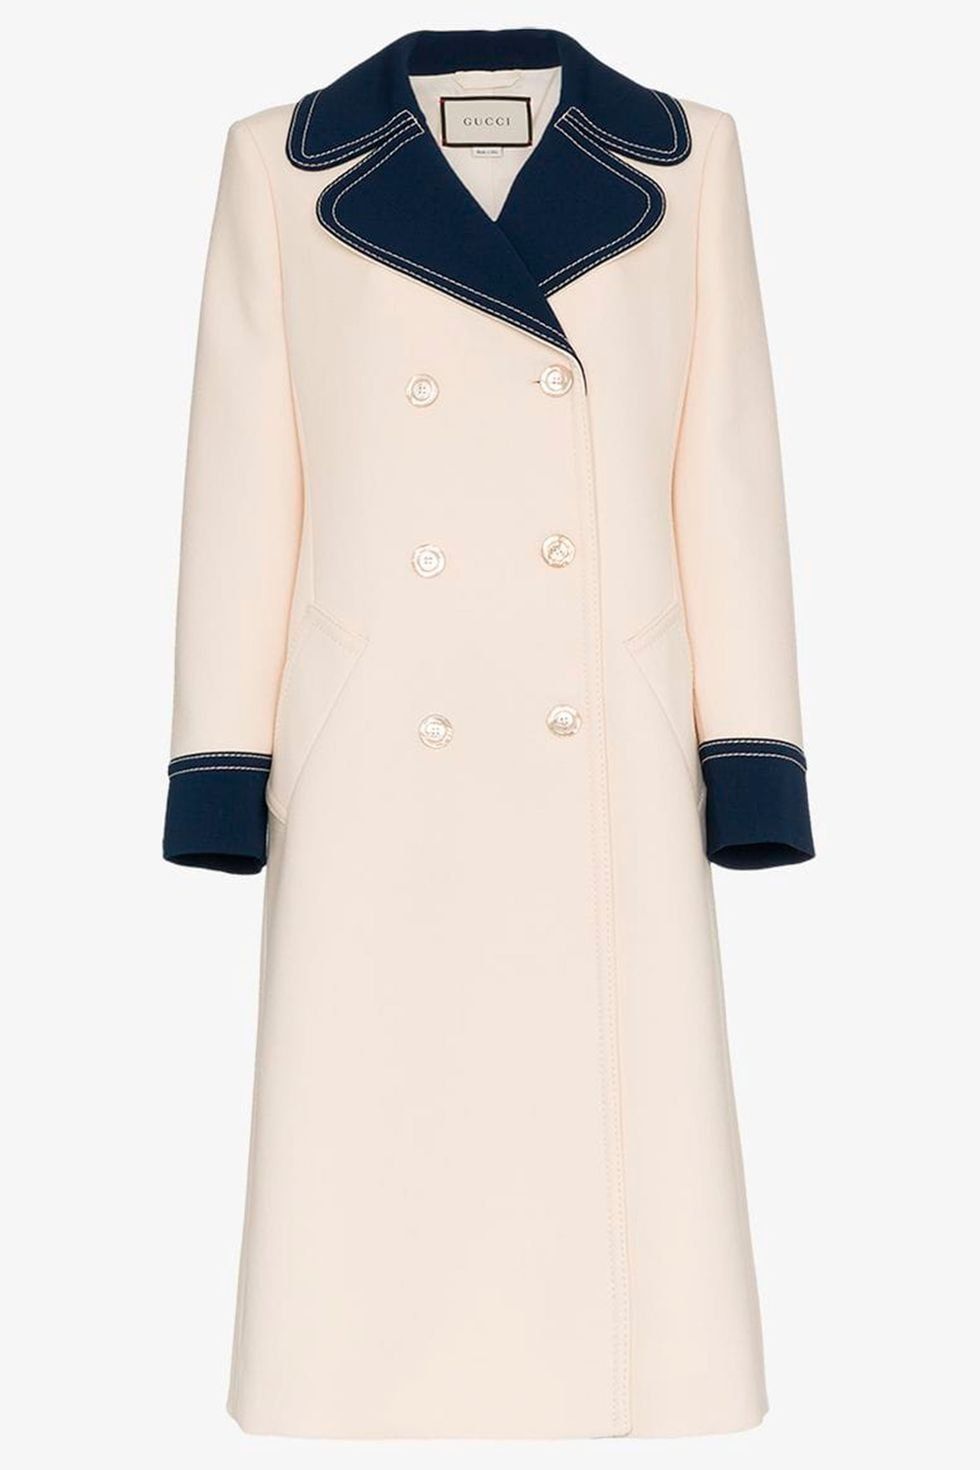 Clothing, Coat, White, Outerwear, Overcoat, Trench coat, Sleeve, Collar, Beige, Fur, 